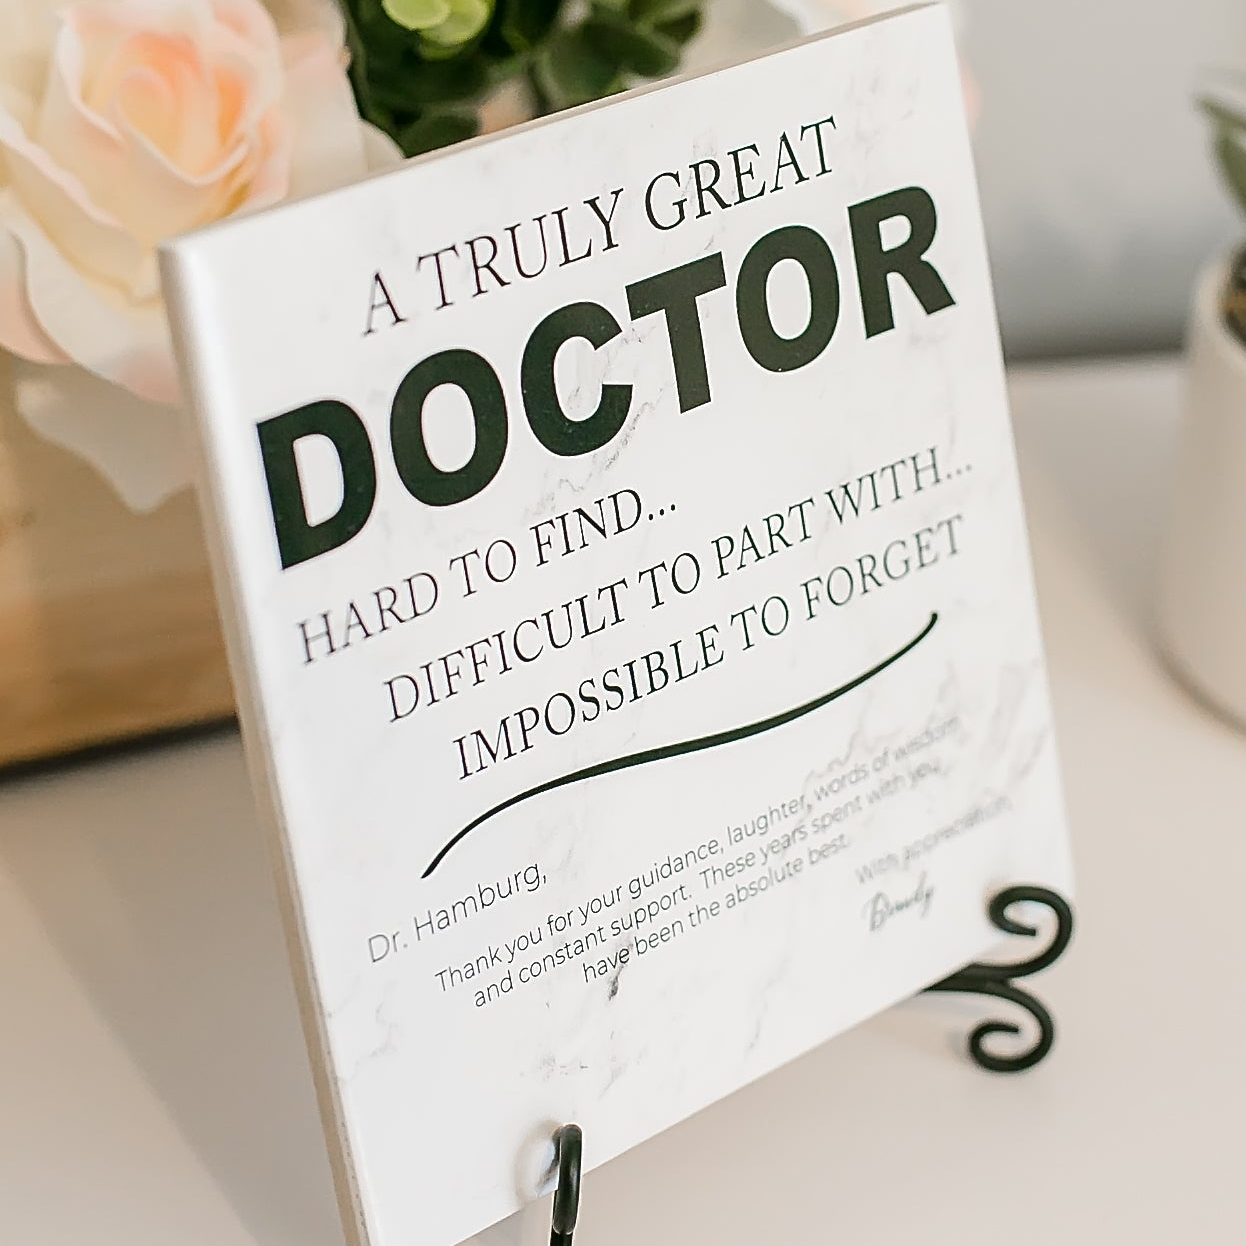 a sign on a table that says a truly great doctor hard to find